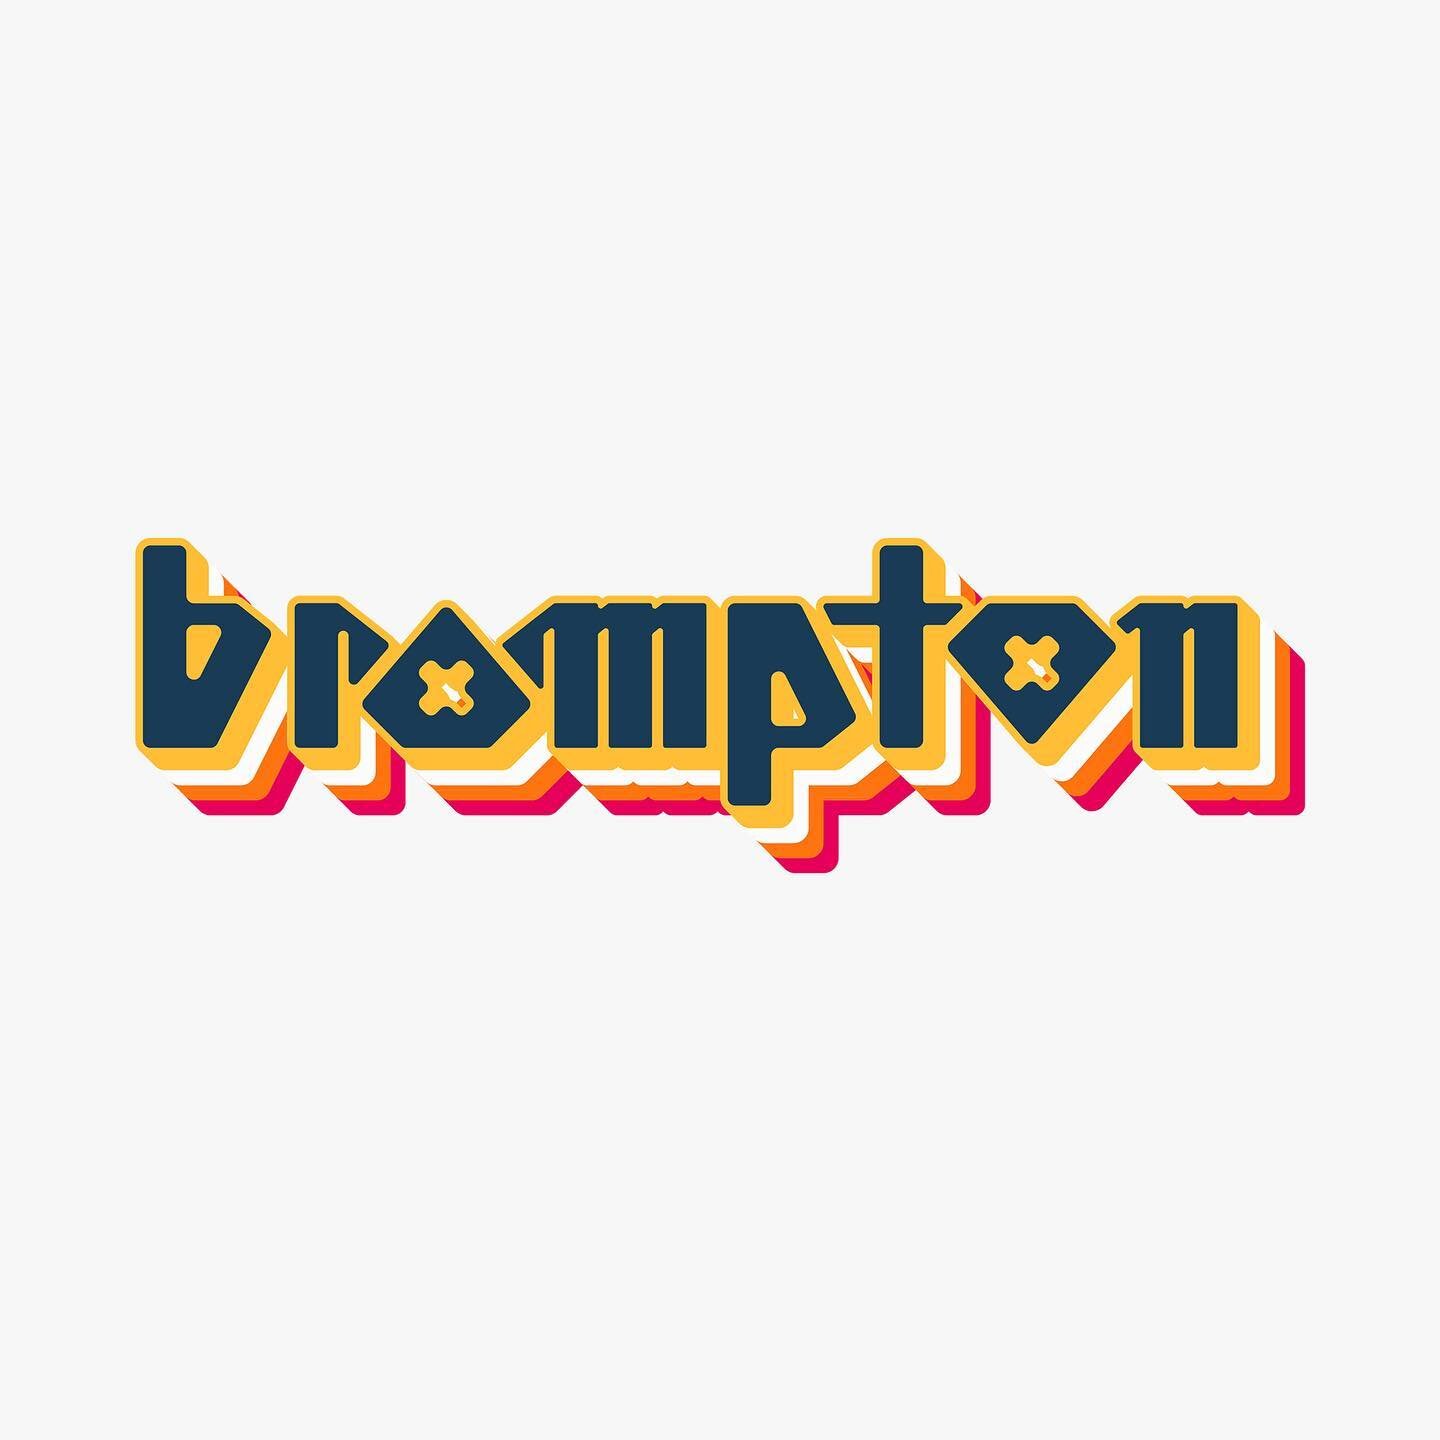 Logo design for a DJ and a producer @bromptonbeats . 
&lsquo;brompton&rsquo; is bending genres in unique ways that haven&rsquo;t been done before, combining elements of electronic, pop, hip-hop and R&amp;B in his music. brompton&rsquo;s tunes certain